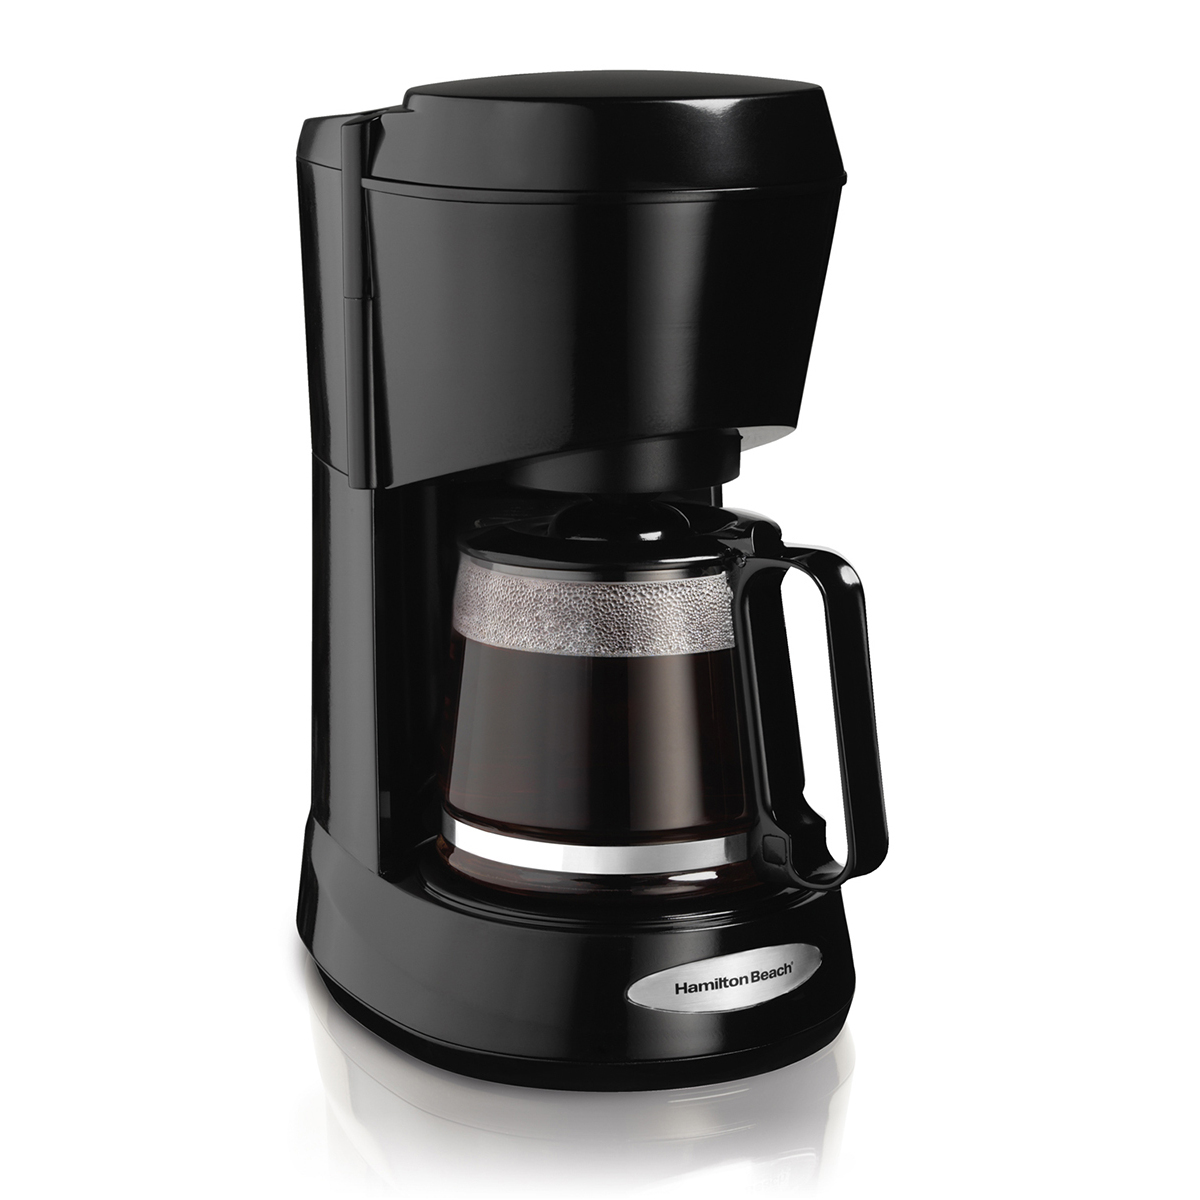 8 Best 5-Cup Coffee Makers 2018 